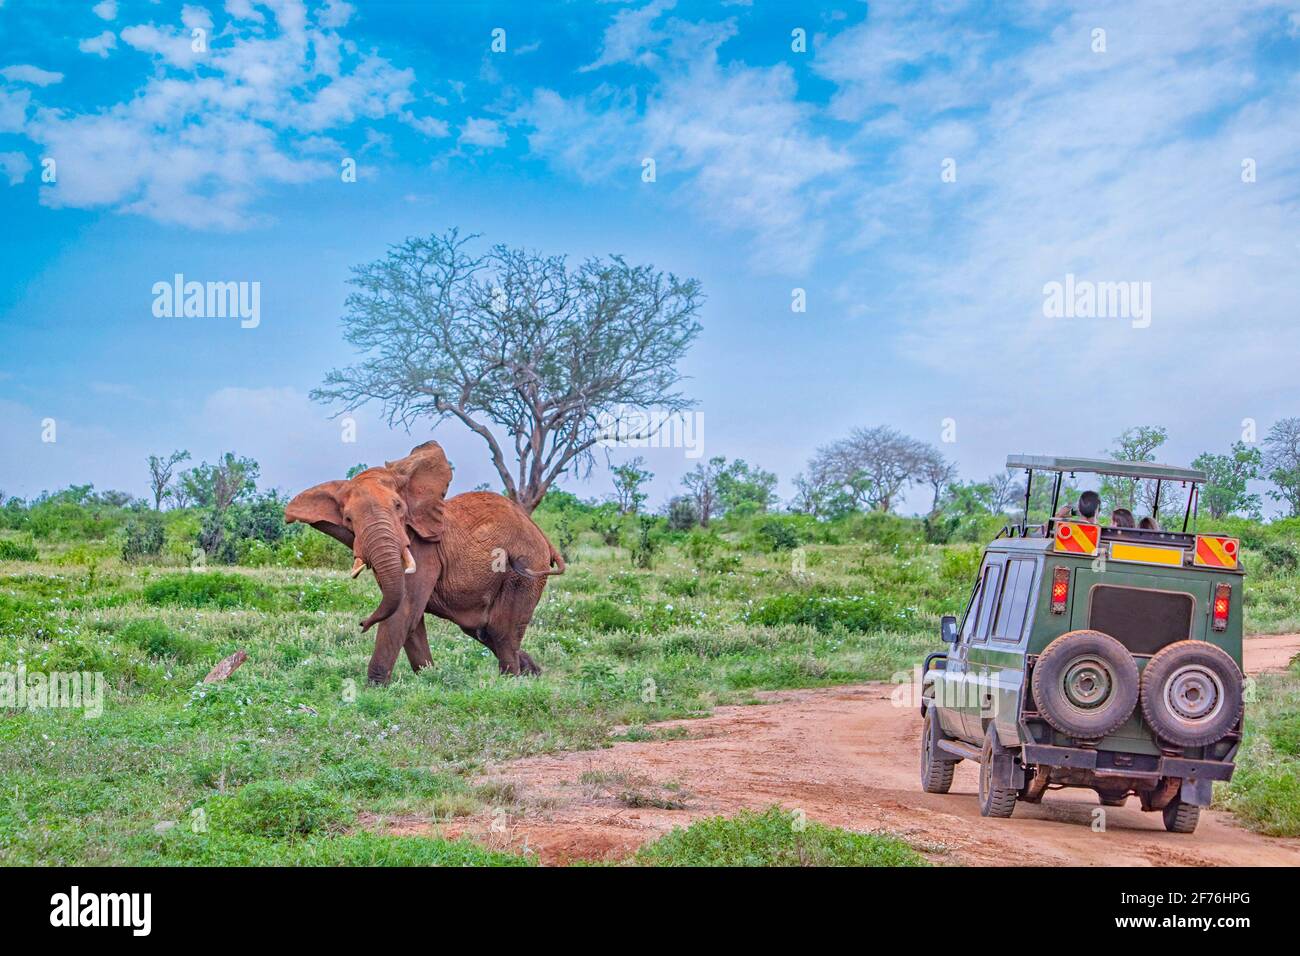 People on safari watch an elephant from off-road car in Tsavo East, Kenya. It is a wildlife photo from Africa. Stock Photo